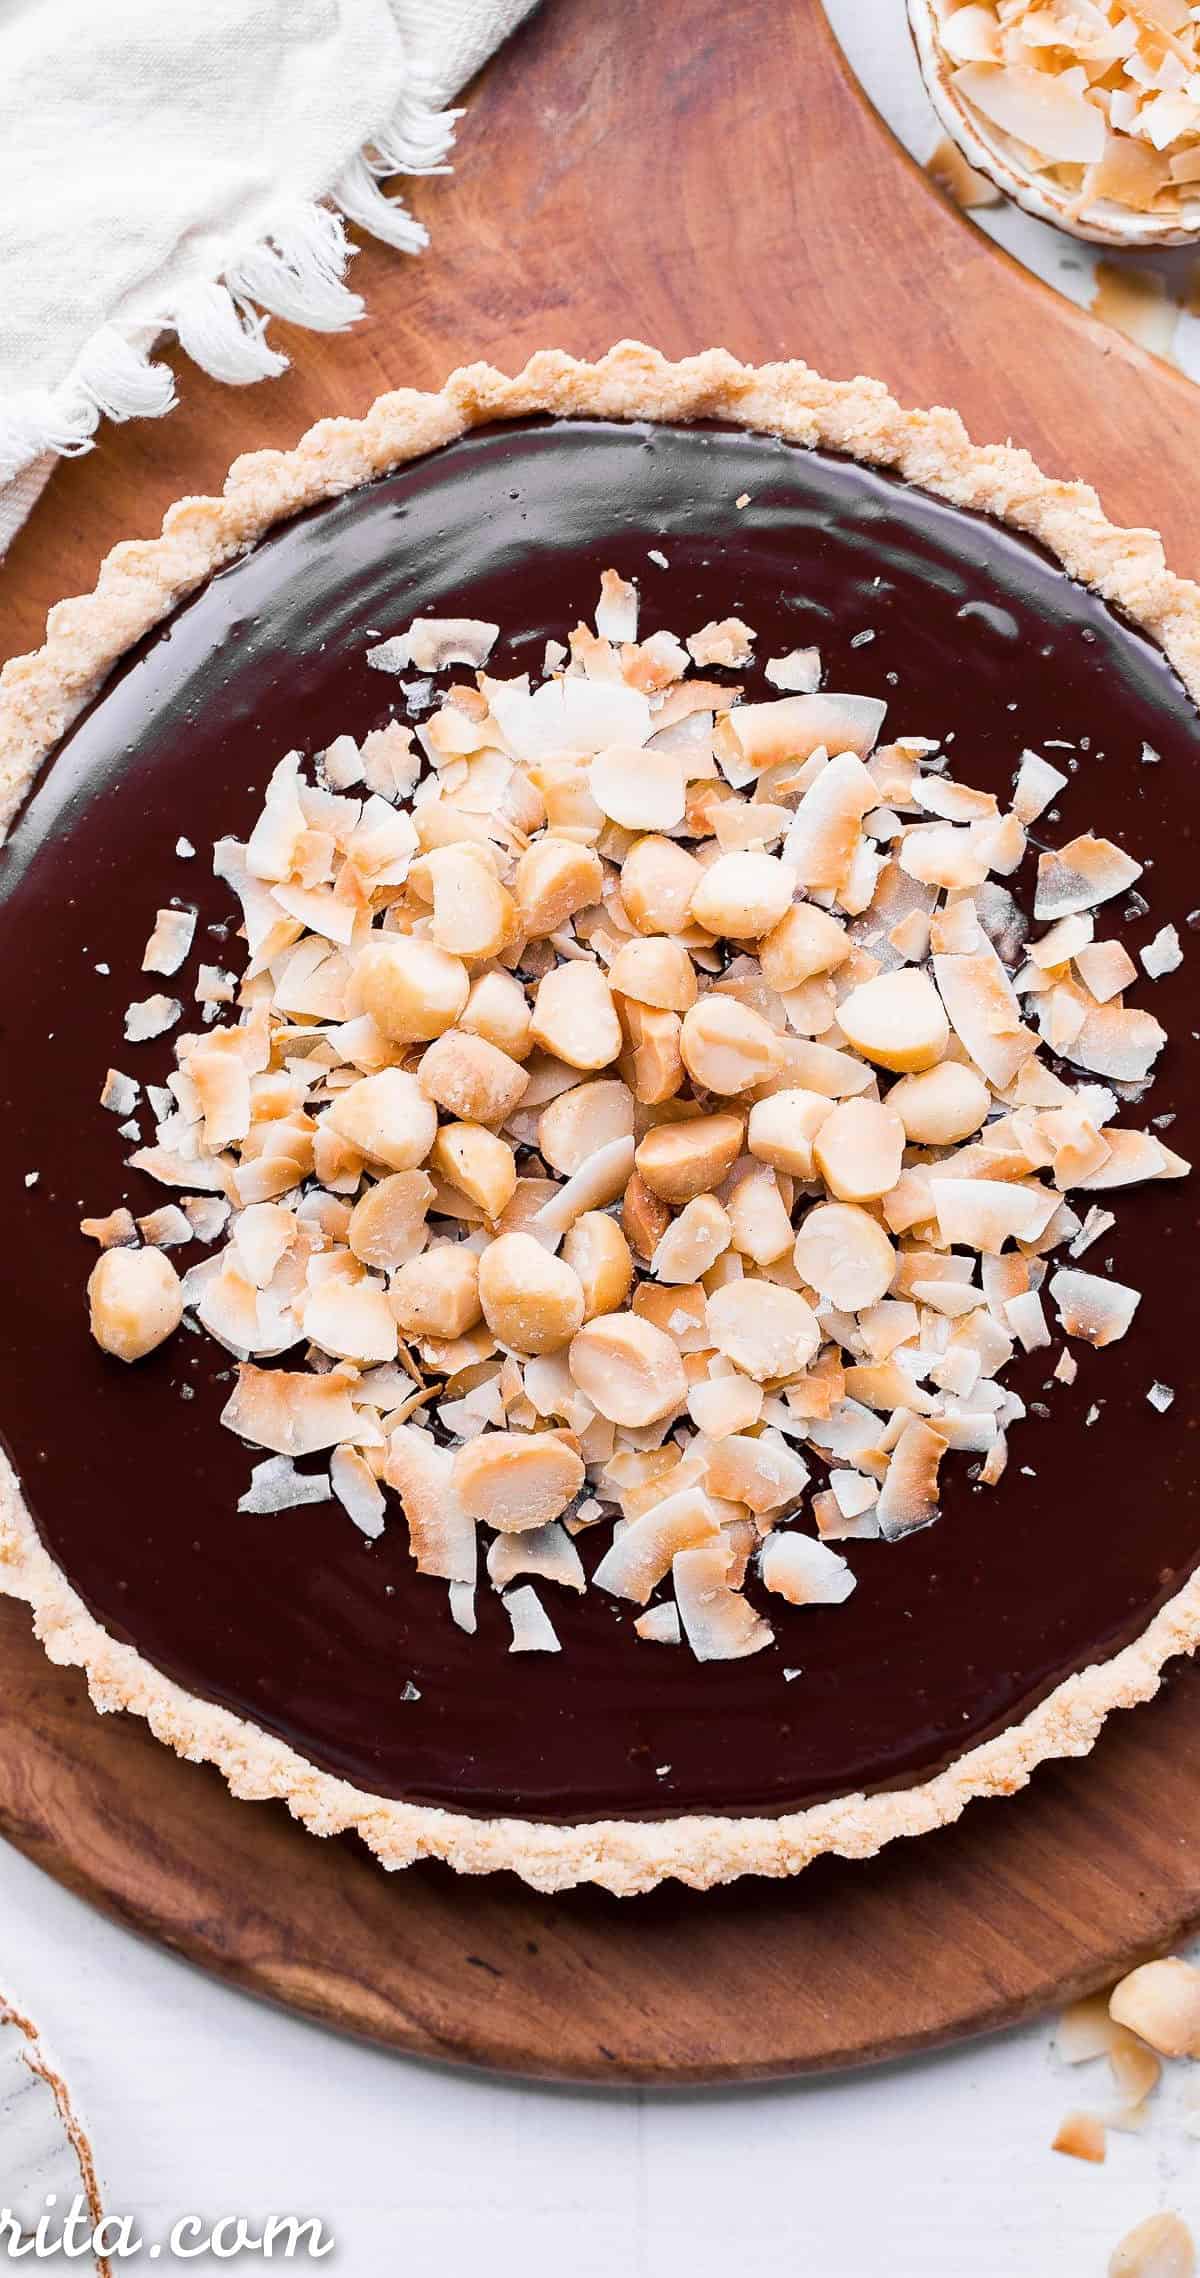  Let this coconut filled nut torte take you on a tropical escape.